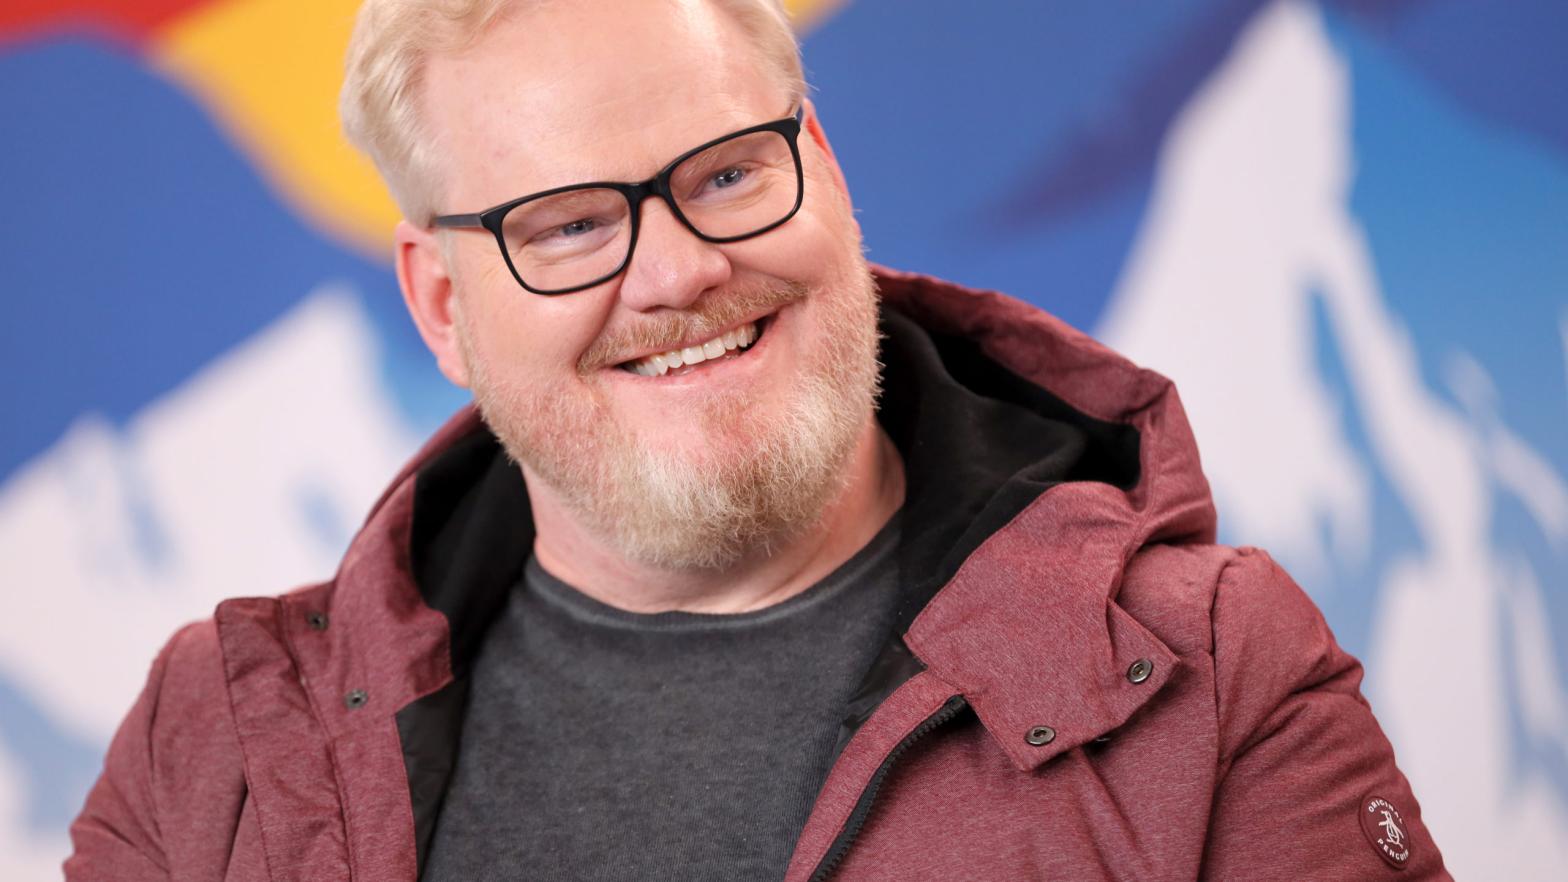 Comedian Jim Gaffigan at the 2020 Sundance Film Festival in Park City, Utah on January 27, 2020. (Photo: Rich Polk, Getty Images)